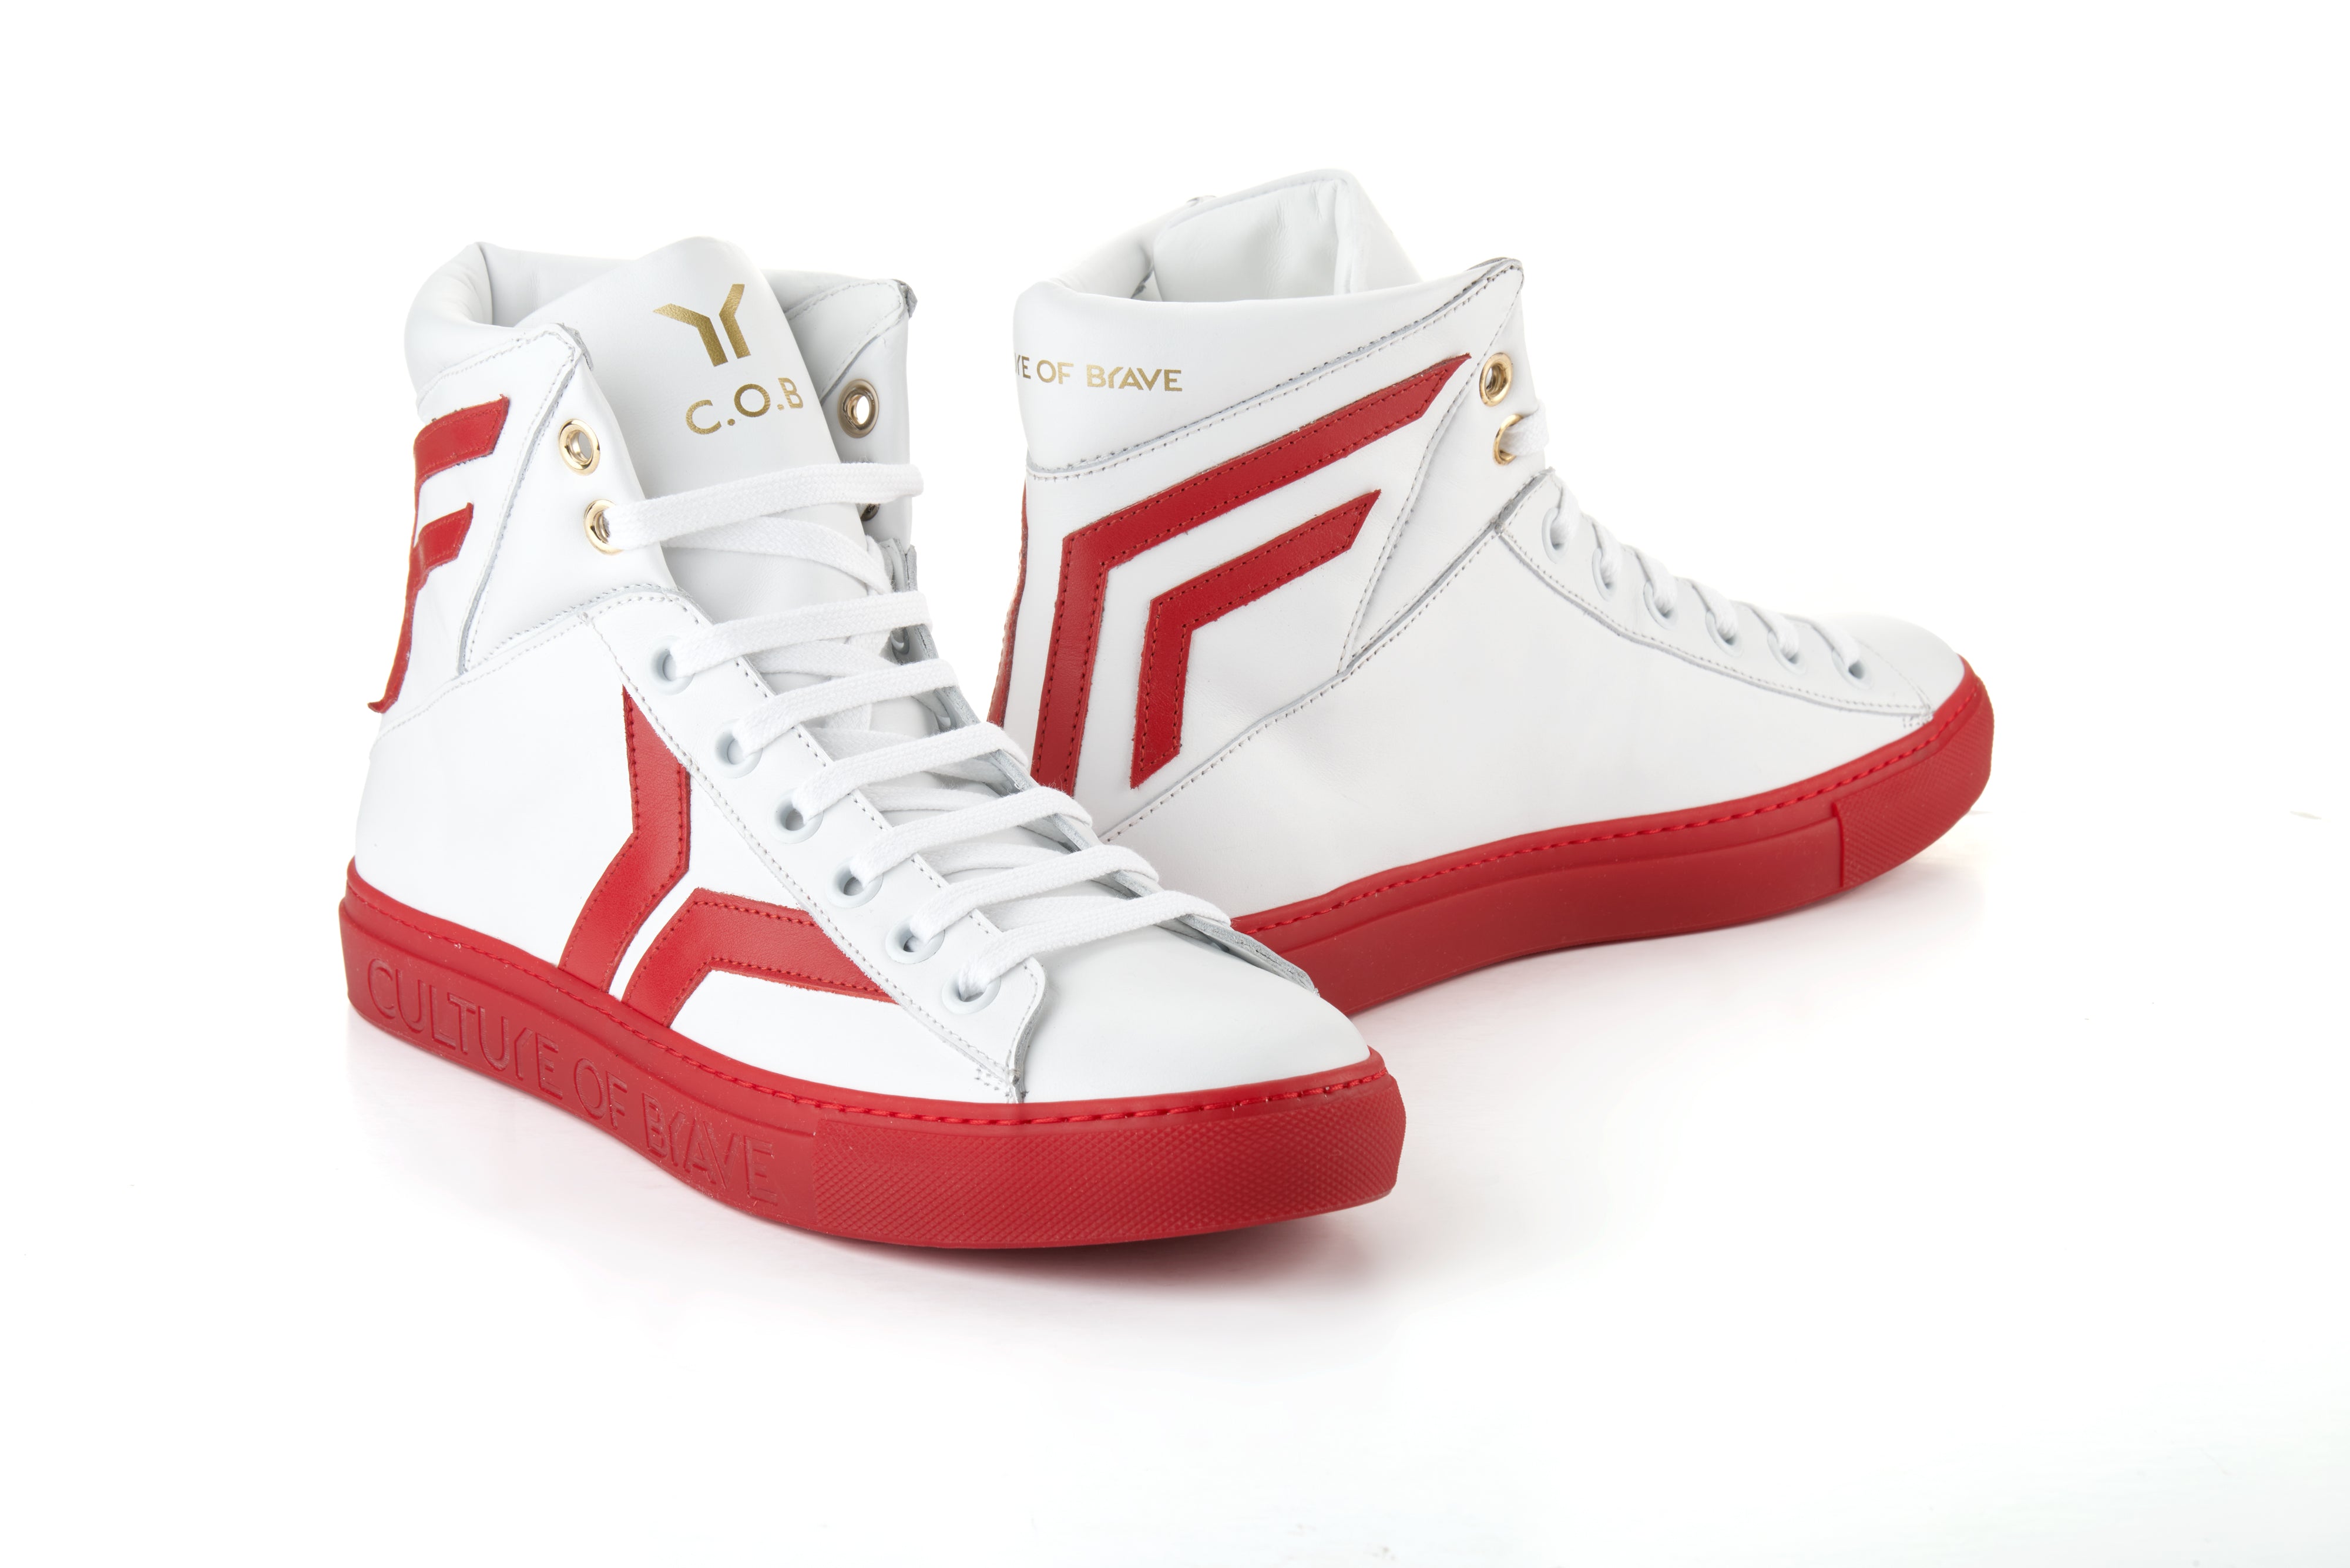 Prepared to Risk 23B Men White leather red wing red sole high cut